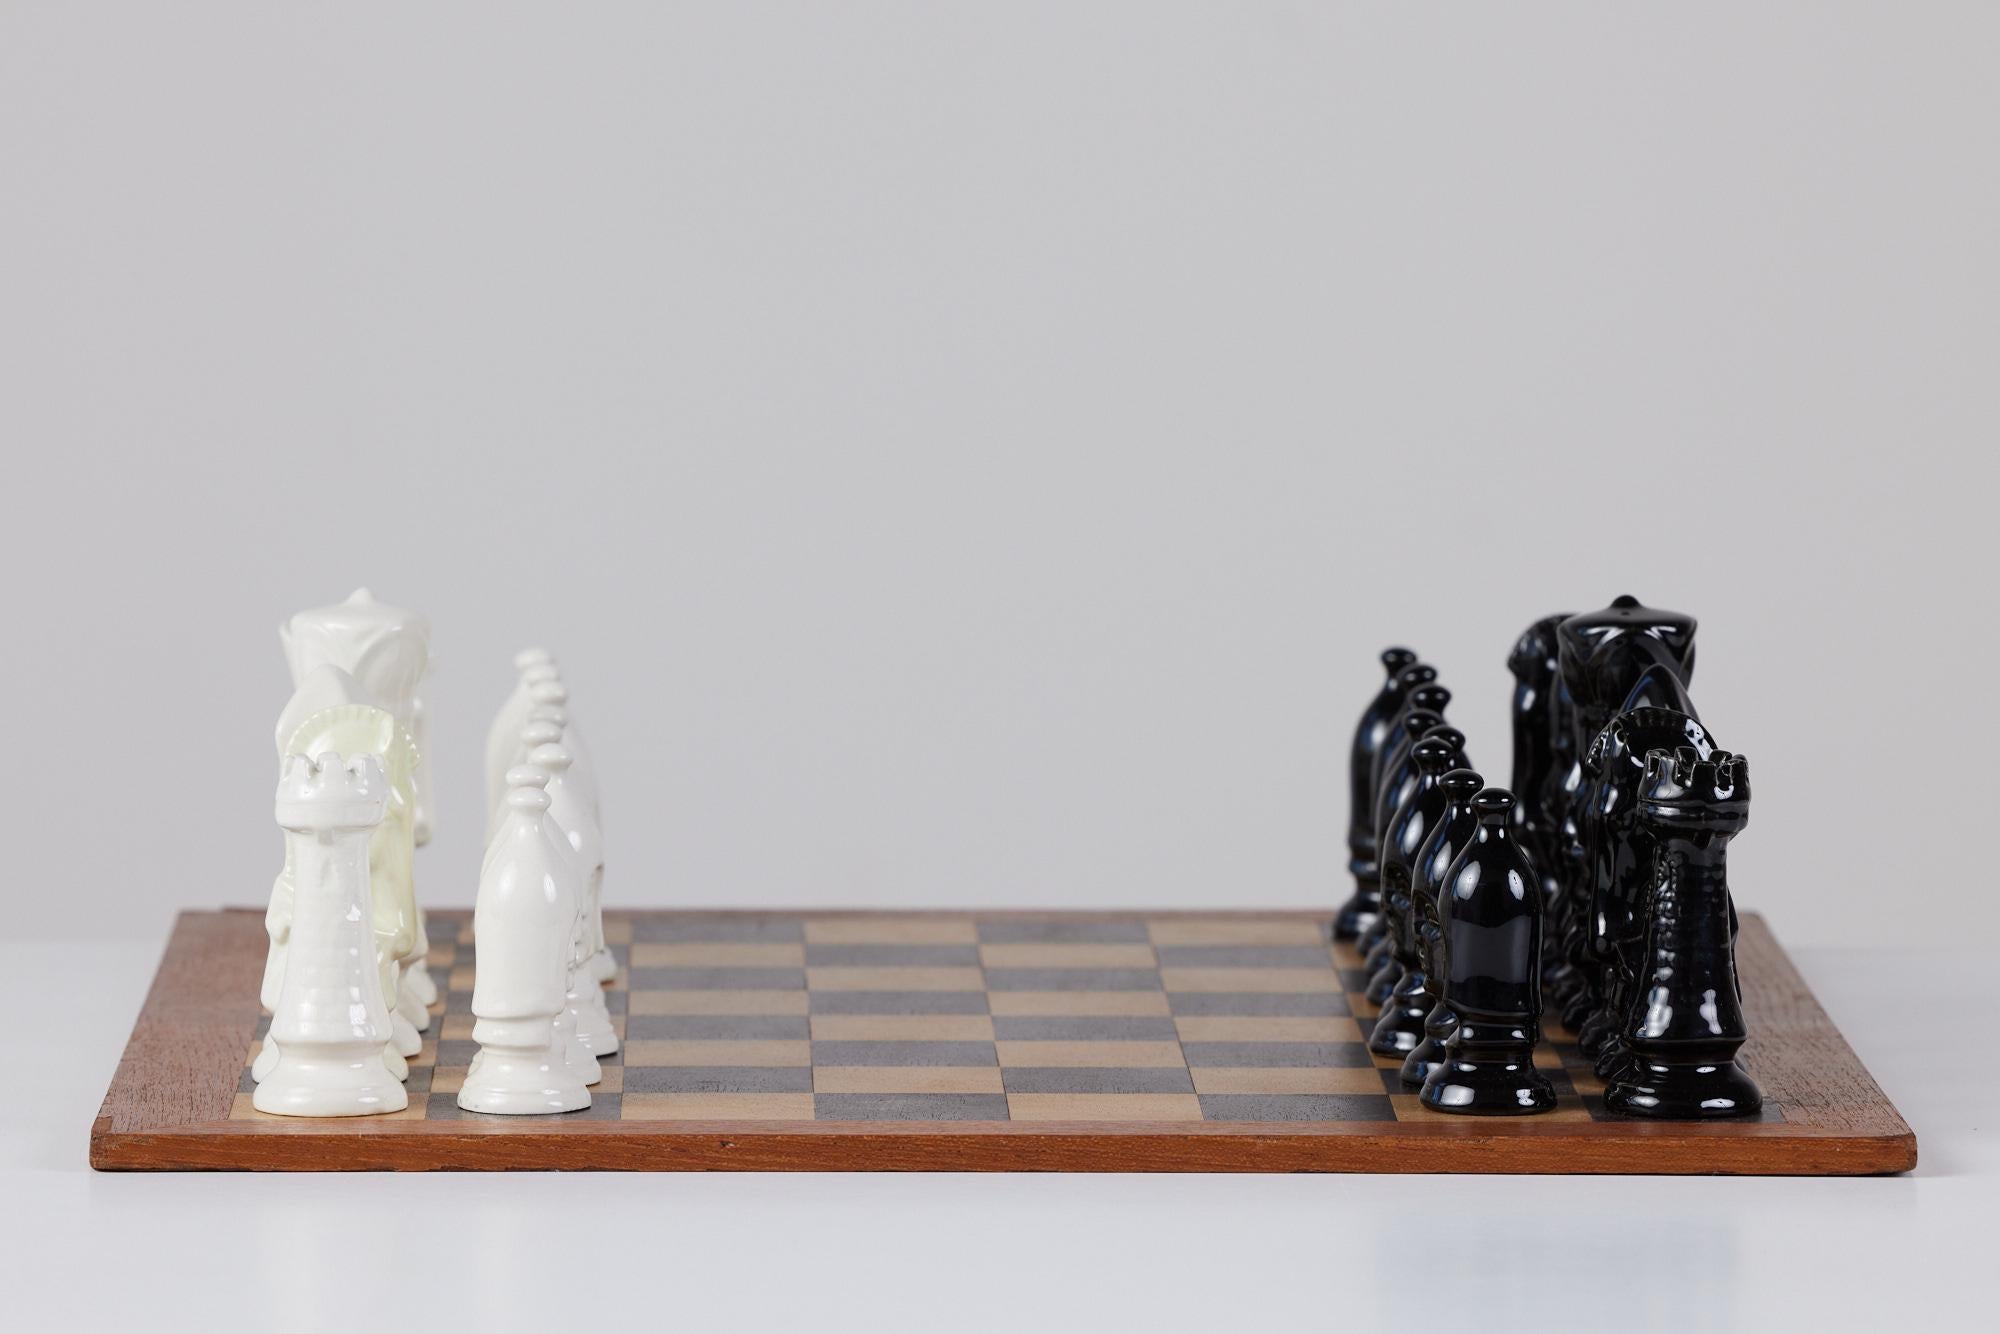 Mid-Century Modern Chess Set with Ceramic Game Pieces